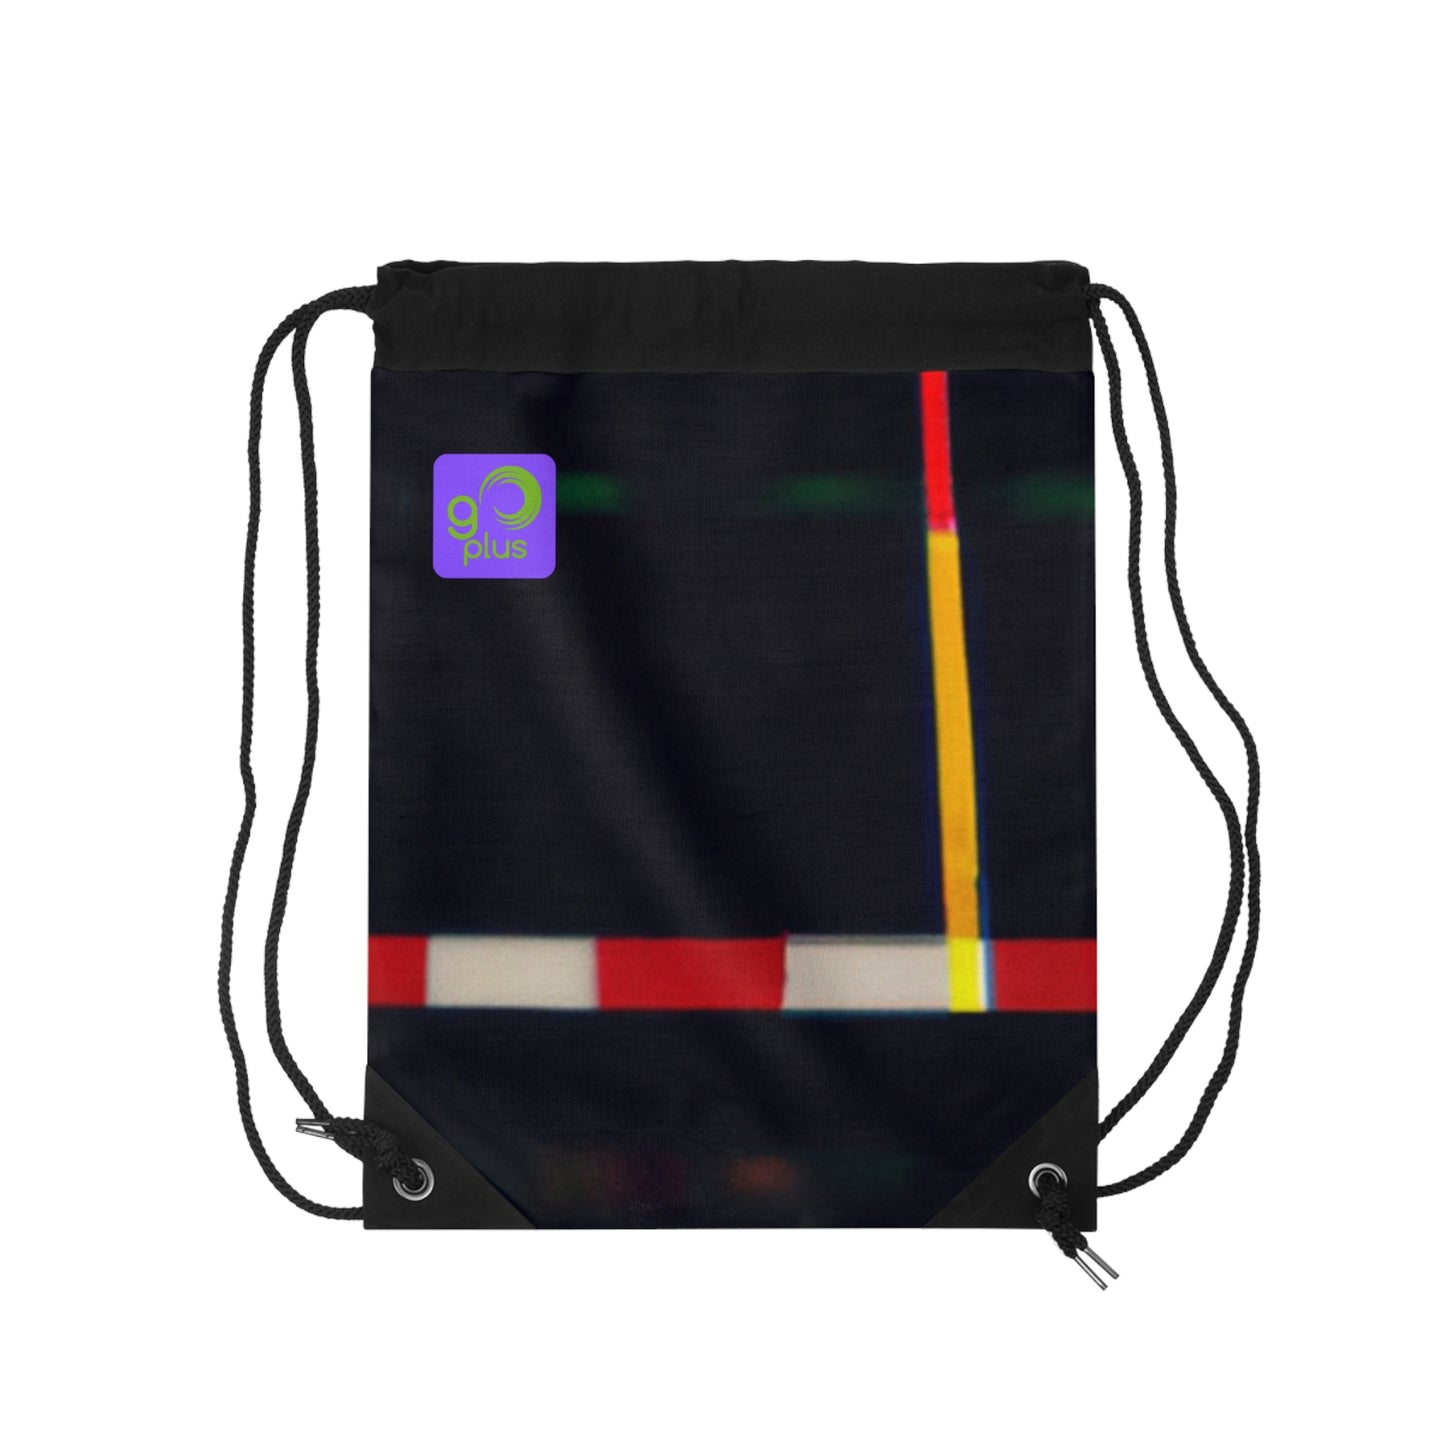 "Athletic Artistry: Capturing the Moment" - Go Plus Drawstring Bag